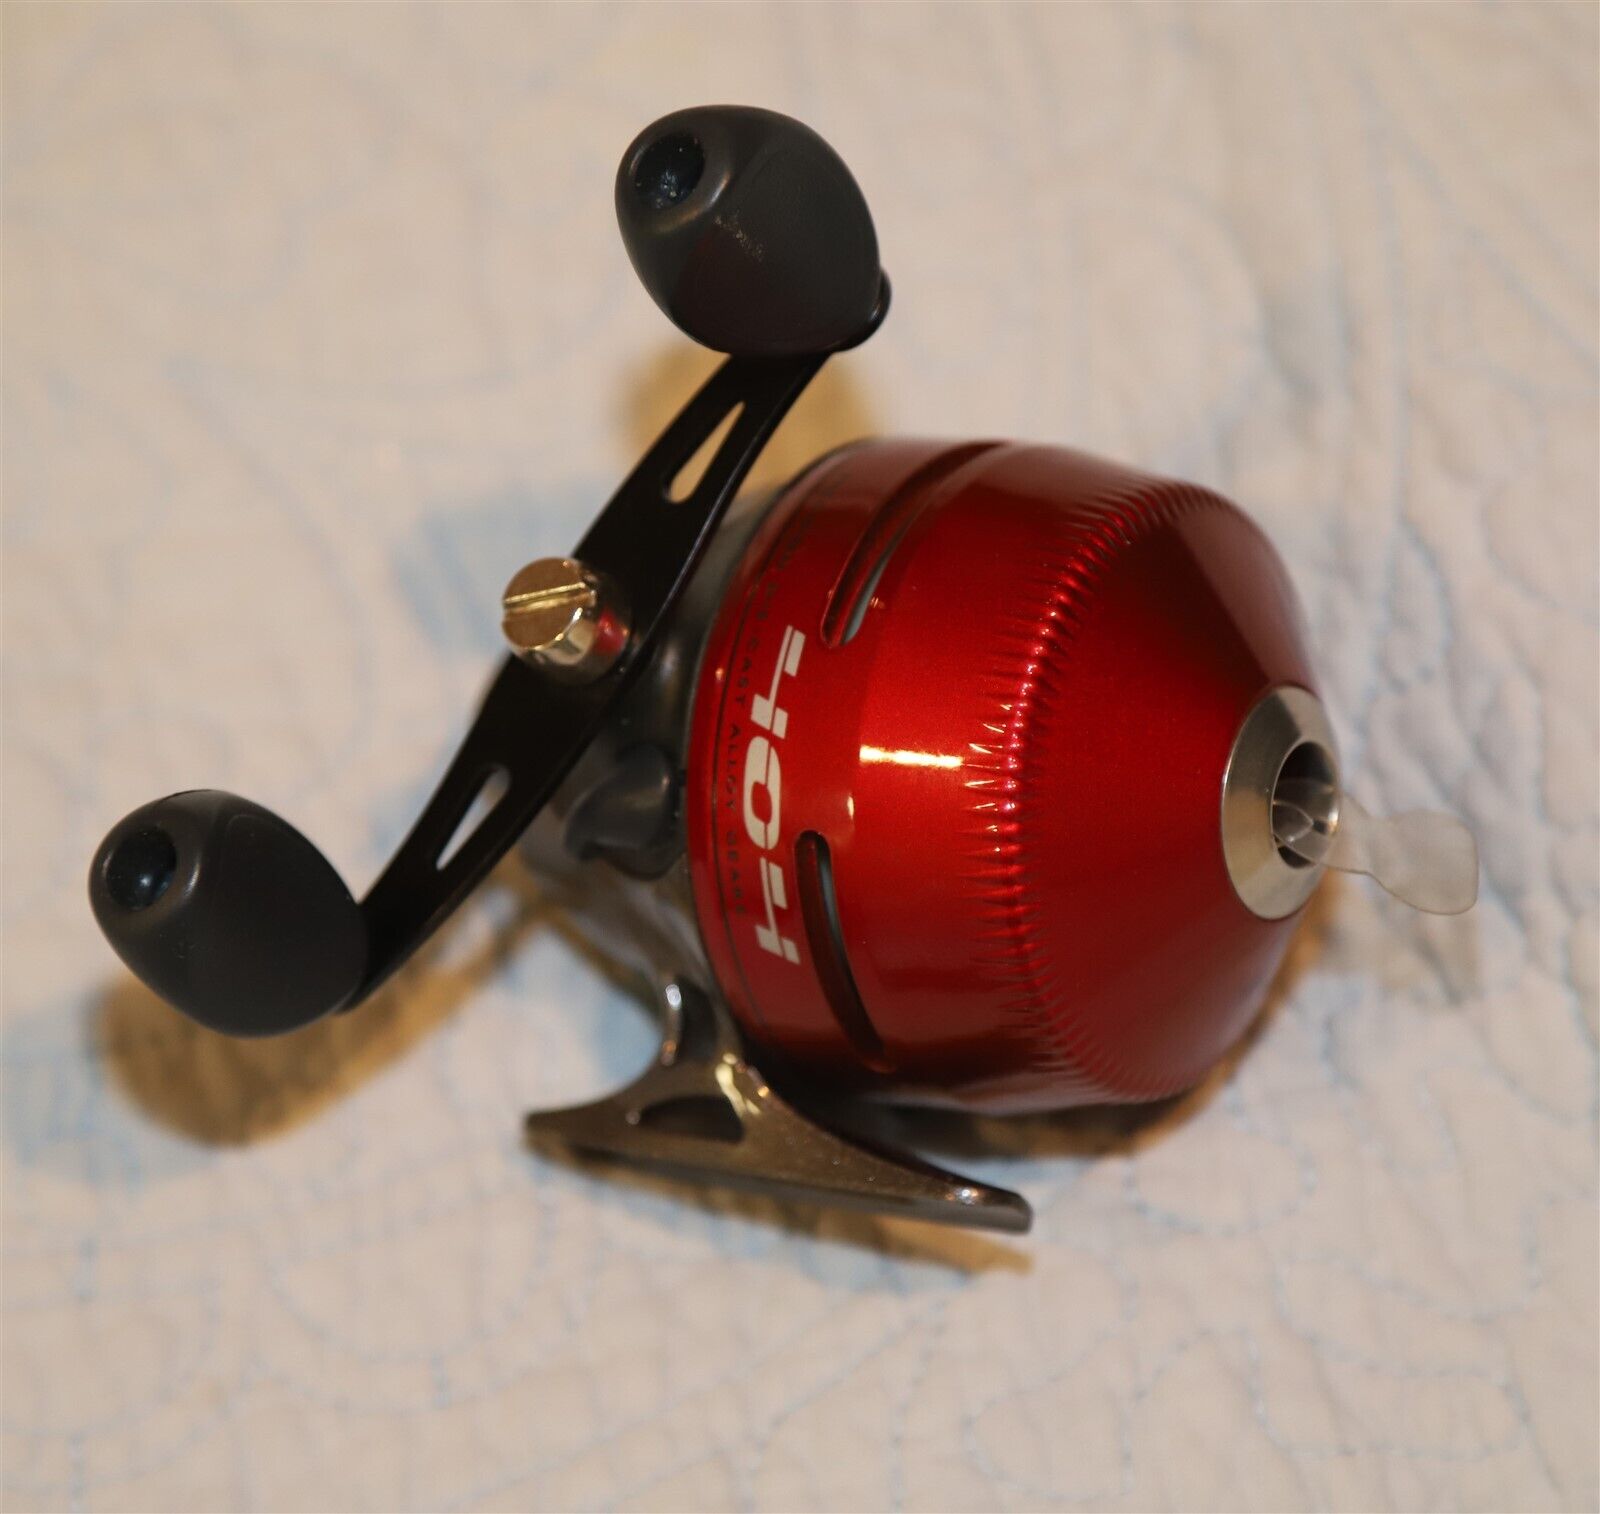 Zebco 404 fishing reel. New without packaging. Red. Spooled.